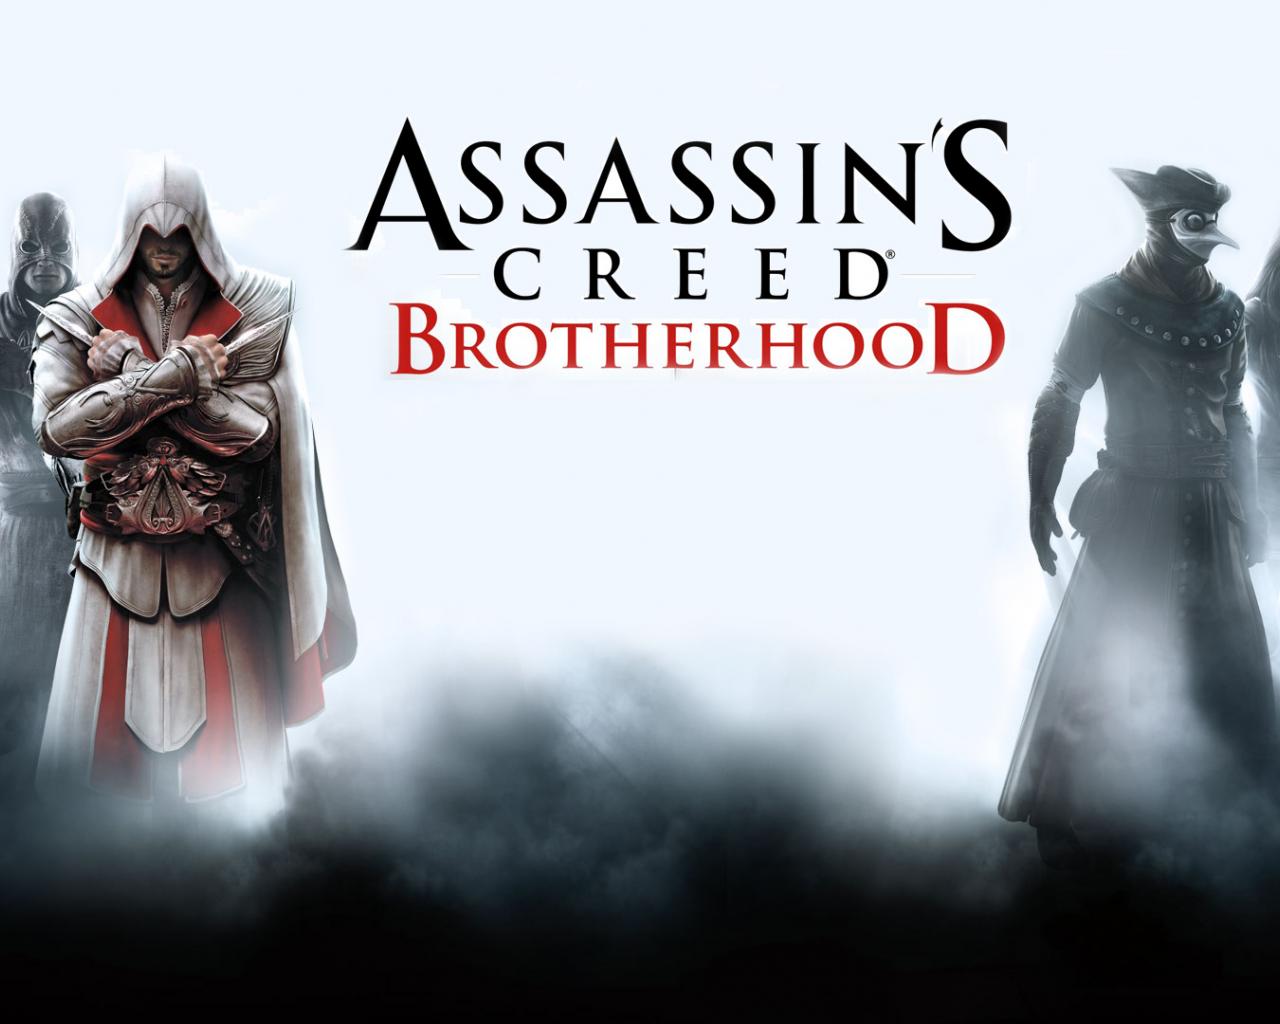 Assassins creed brotherhood mac download free free icons download for mac os x